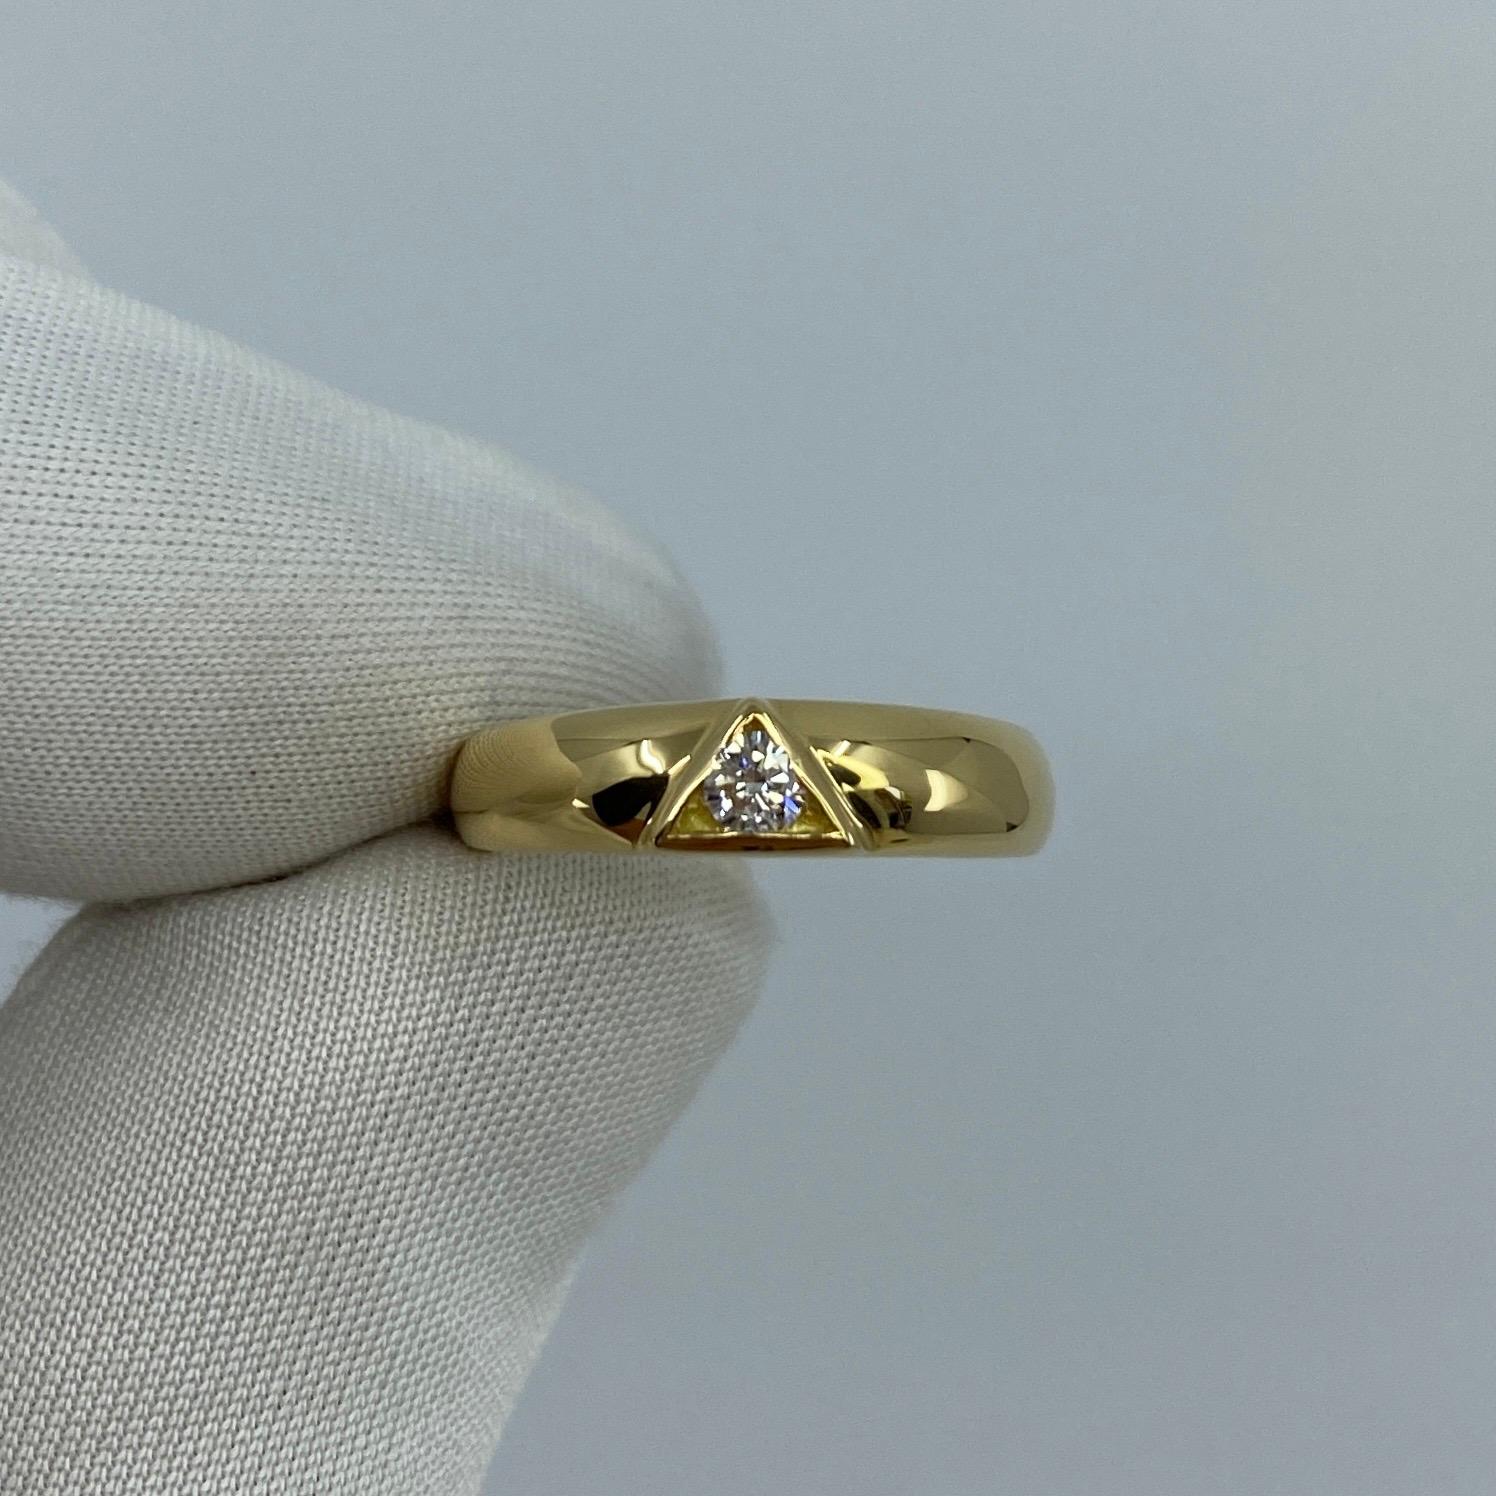 Van Cleef & Arpels Diamond Solitaire 18k Yellow Gold Ring.

A stunning vintage ring with a triangle motif design, set with a 3mm round cut white diamond. Fine jewellery houses like Van Cleef & Arpels only use the finest of gemstones. Approx 0.10ct